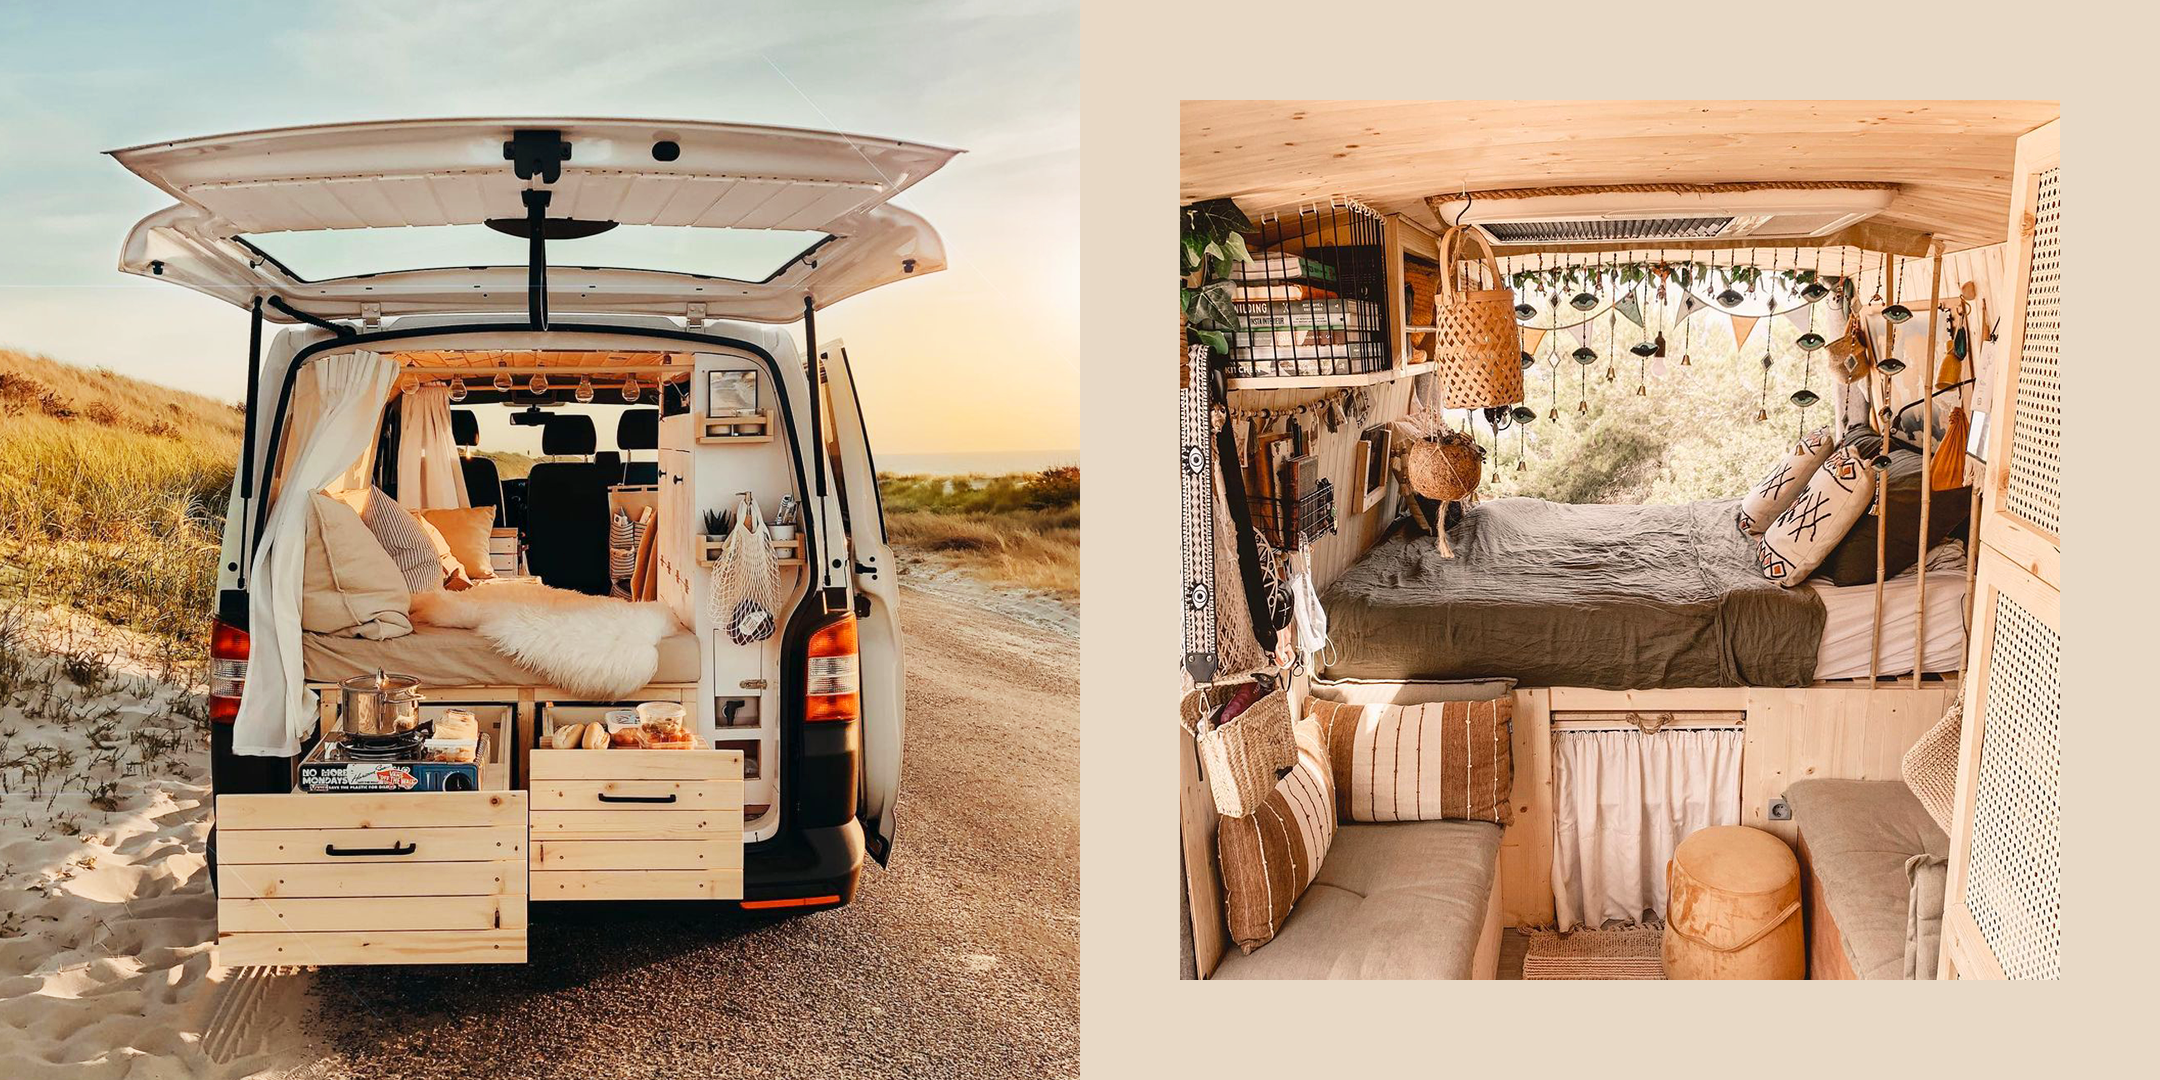 17 Van Design & Decoration Ideas for Living on the Road